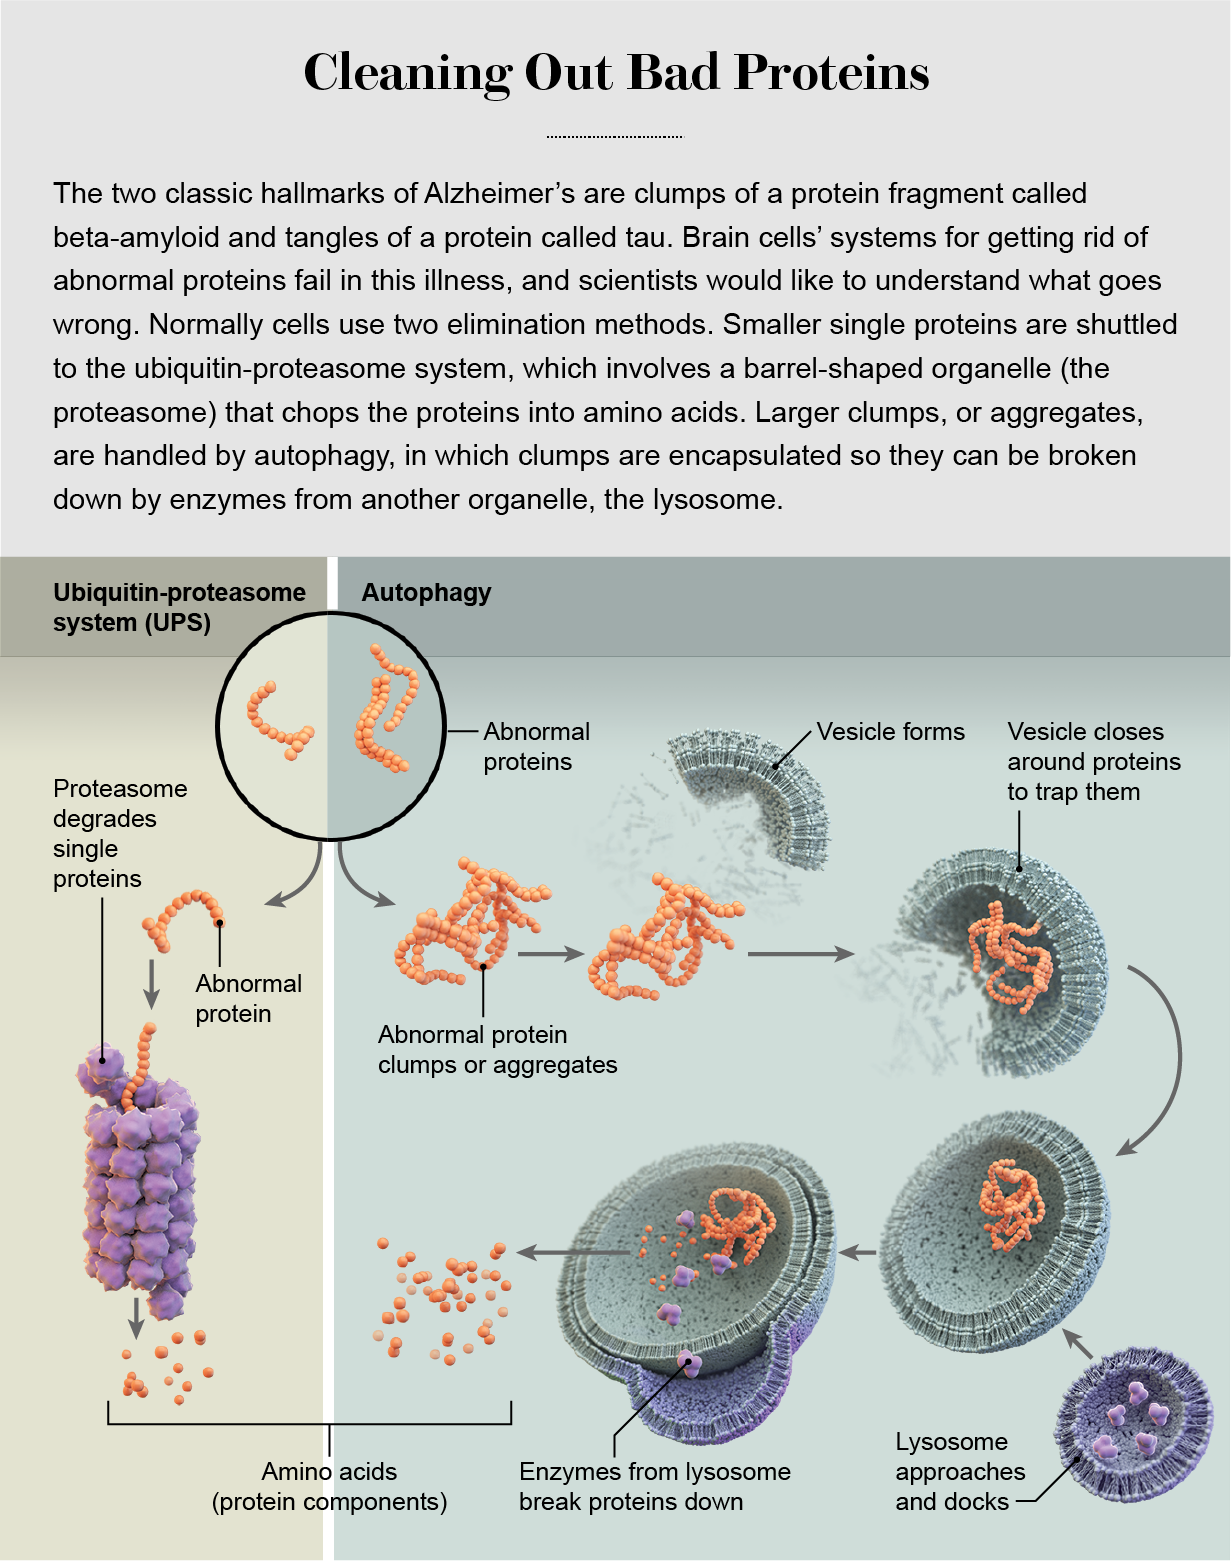 Illustration shows two pathways by which abnormal proteins are eliminated in the brain: the ubiquitin-proteasome system and autophagy.